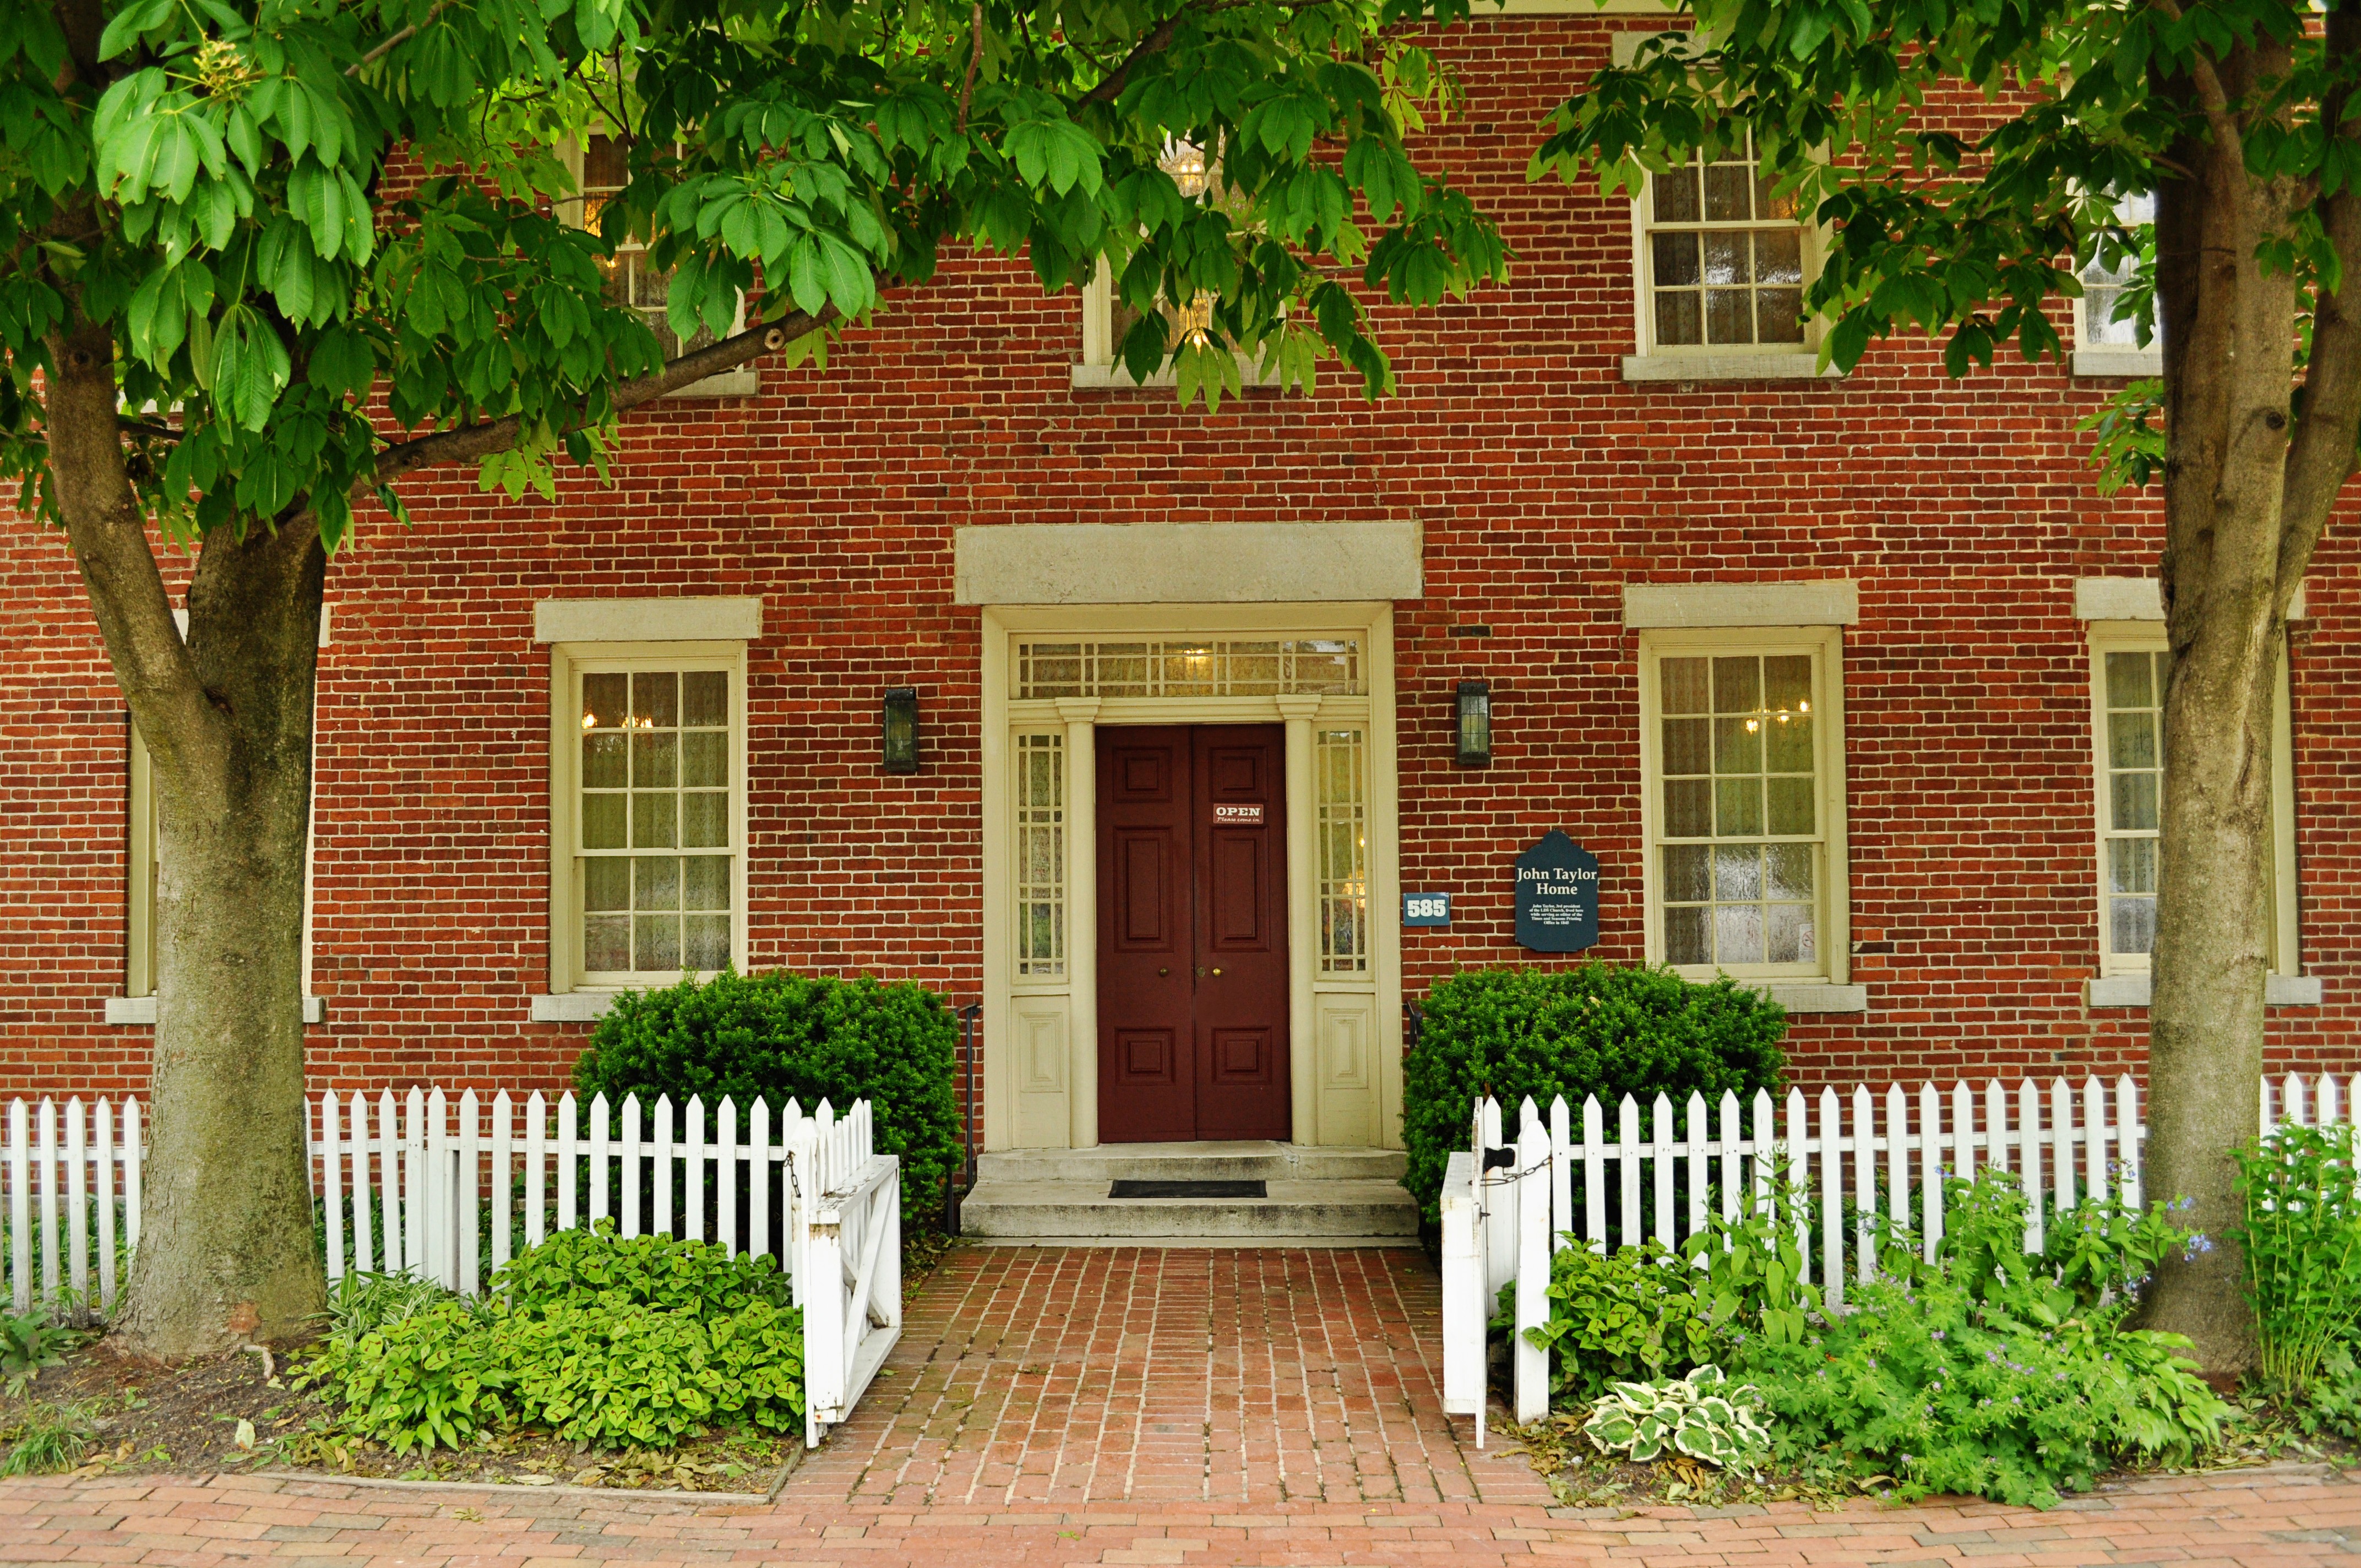 The red-brick home of John Taylor with a white picket fence in front and two trees on either side of the front door.